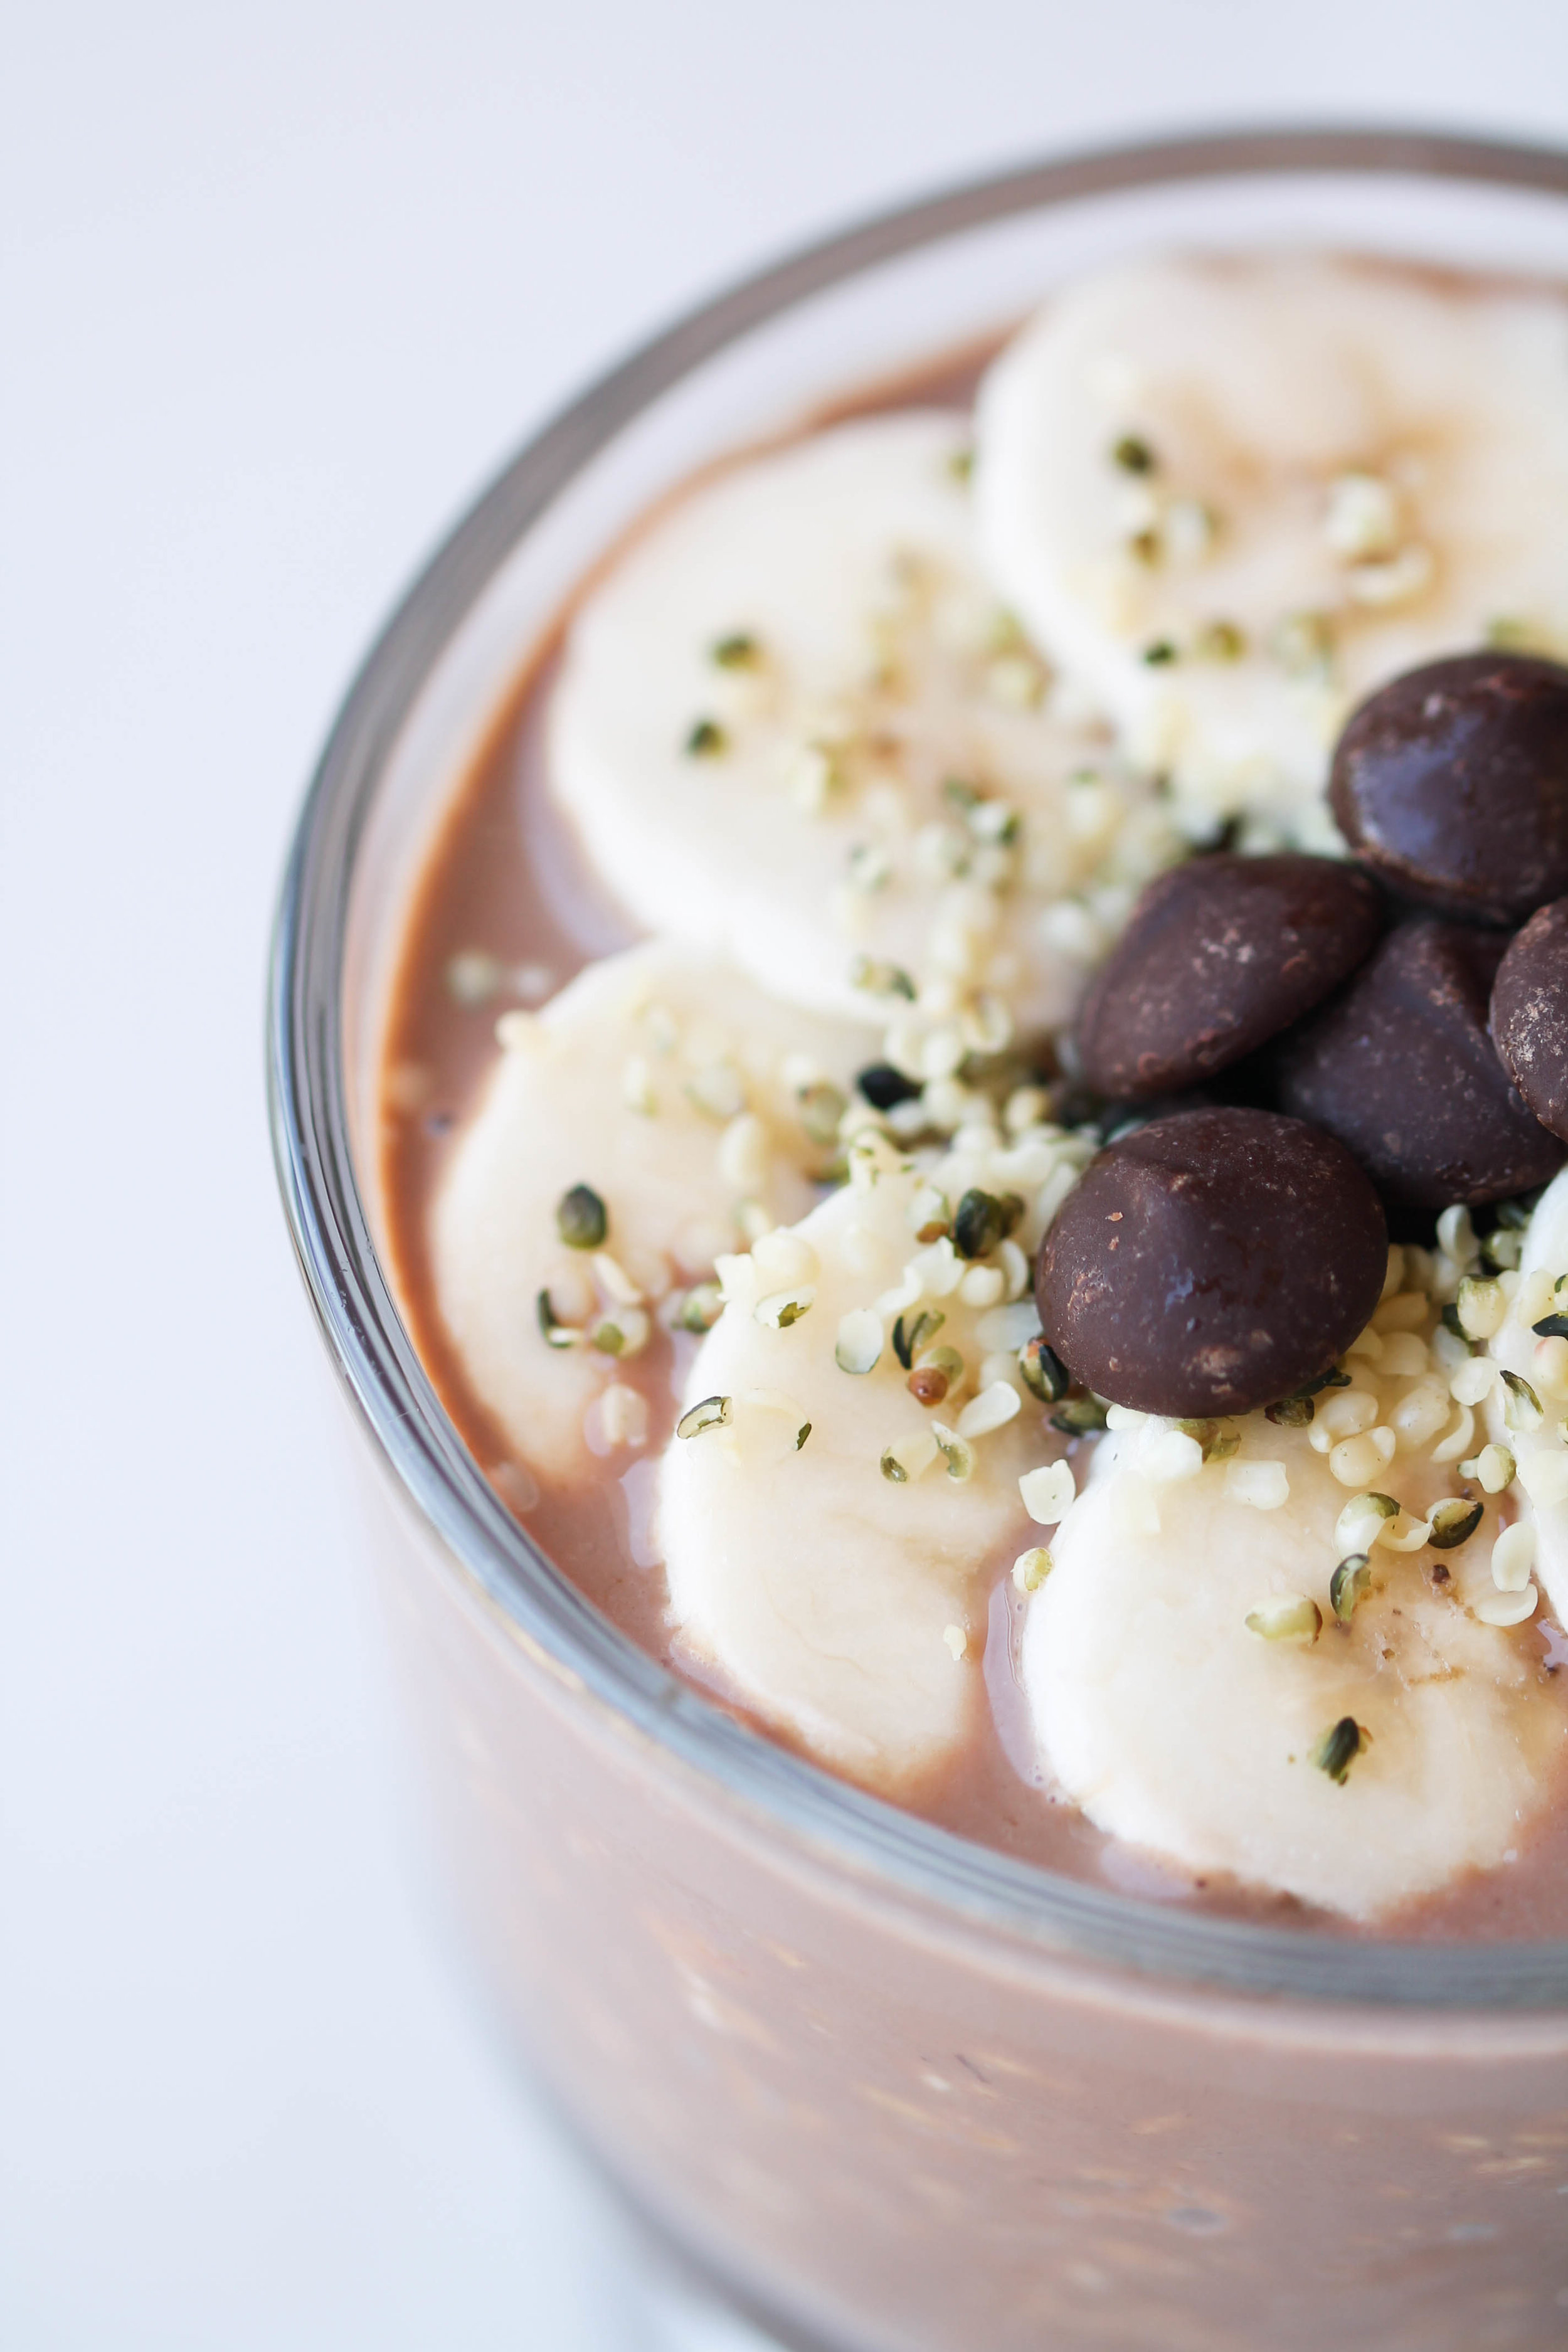 Mocha Overnight Oats are perfect grab n' go breakfast. The combination of coffee and chocolate together makes it a decadent, wholesome breakfast that everyone will love.